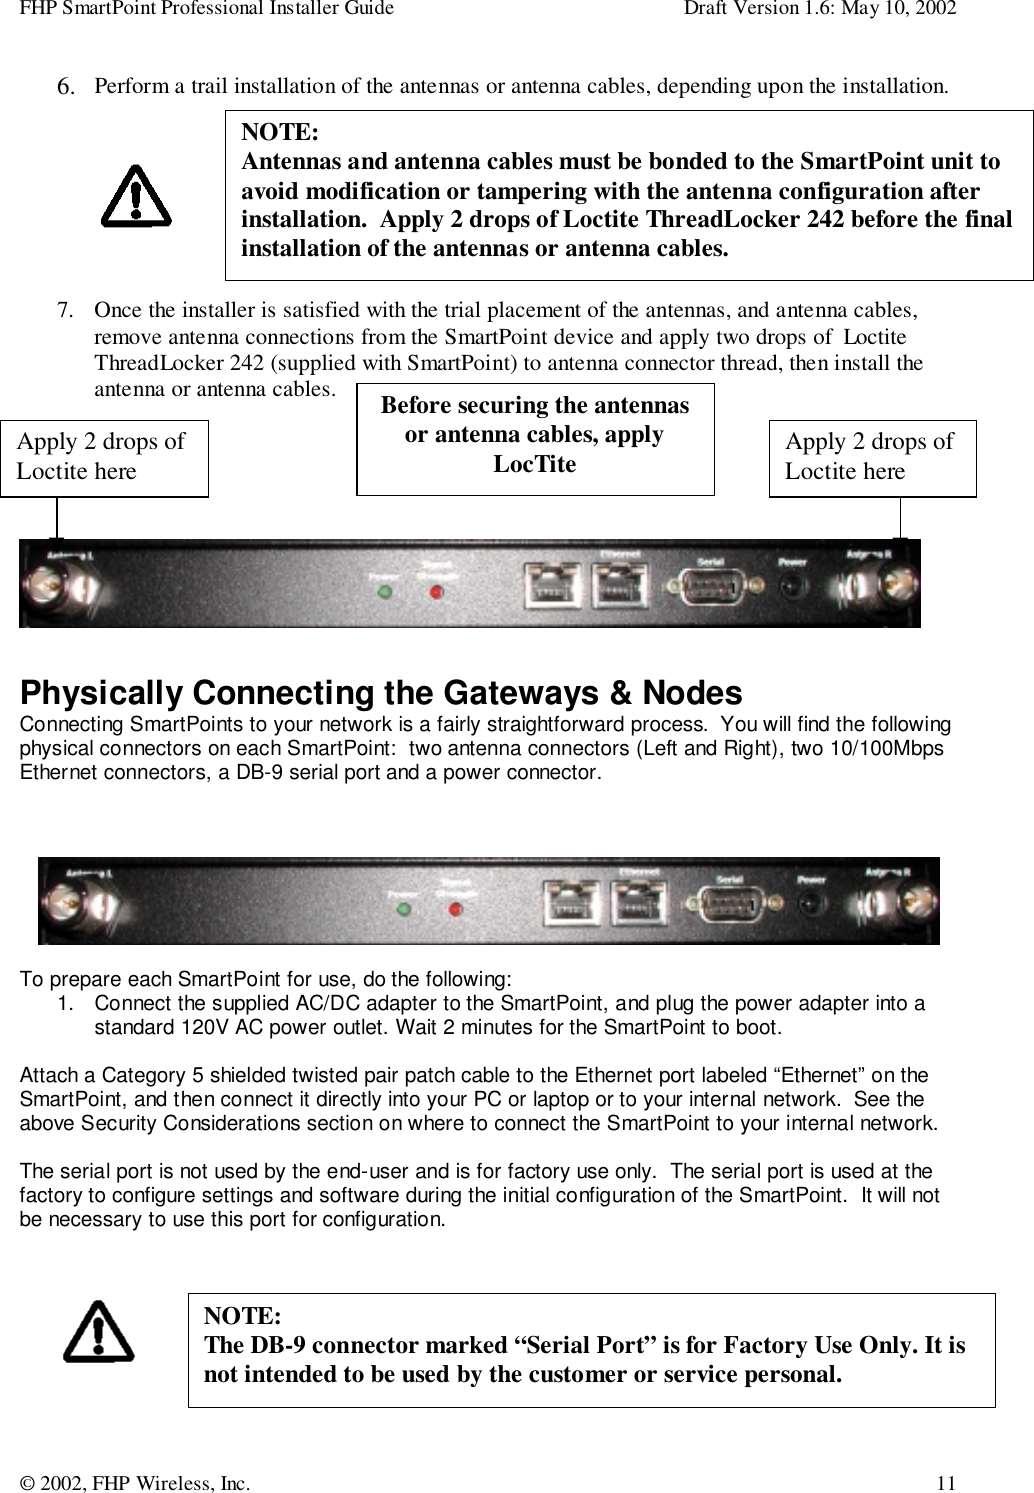 FHP SmartPoint Professional Installer Guide Draft Version 1.6: May 10, 2002© 2002, FHP Wireless, Inc. 116. Perform a trail installation of the antennas or antenna cables, depending upon the installation.7. Once the installer is satisfied with the trial placement of the antennas, and antenna cables,remove antenna connections from the SmartPoint device and apply two drops of  LoctiteThreadLocker 242 (supplied with SmartPoint) to antenna connector thread, then install theantenna or antenna cables.Physically Connecting the Gateways &amp; NodesConnecting SmartPoints to your network is a fairly straightforward process.  You will find the followingphysical connectors on each SmartPoint:  two antenna connectors (Left and Right), two 10/100MbpsEthernet connectors, a DB-9 serial port and a power connector.To prepare each SmartPoint for use, do the following:1.  Connect the supplied AC/DC adapter to the SmartPoint, and plug the power adapter into astandard 120V AC power outlet. Wait 2 minutes for the SmartPoint to boot.Attach a Category 5 shielded twisted pair patch cable to the Ethernet port labeled “Ethernet” on theSmartPoint, and then connect it directly into your PC or laptop or to your internal network.  See theabove Security Considerations section on where to connect the SmartPoint to your internal network.The serial port is not used by the end-user and is for factory use only.  The serial port is used at thefactory to configure settings and software during the initial configuration of the SmartPoint.  It will notbe necessary to use this port for configuration.NOTE:Antennas and antenna cables must be bonded to the SmartPoint unit toavoid modification or tampering with the antenna configuration afterinstallation.  Apply 2 drops of Loctite ThreadLocker 242 before the finalinstallation of the antennas or antenna cables.Apply 2 drops ofLoctite hereApply 2 drops ofLoctite hereBefore securing the antennasor antenna cables, applyLocTiteNOTE:The DB-9 connector marked “Serial Port” is for Factory Use Only. It isnot intended to be used by the customer or service personal.